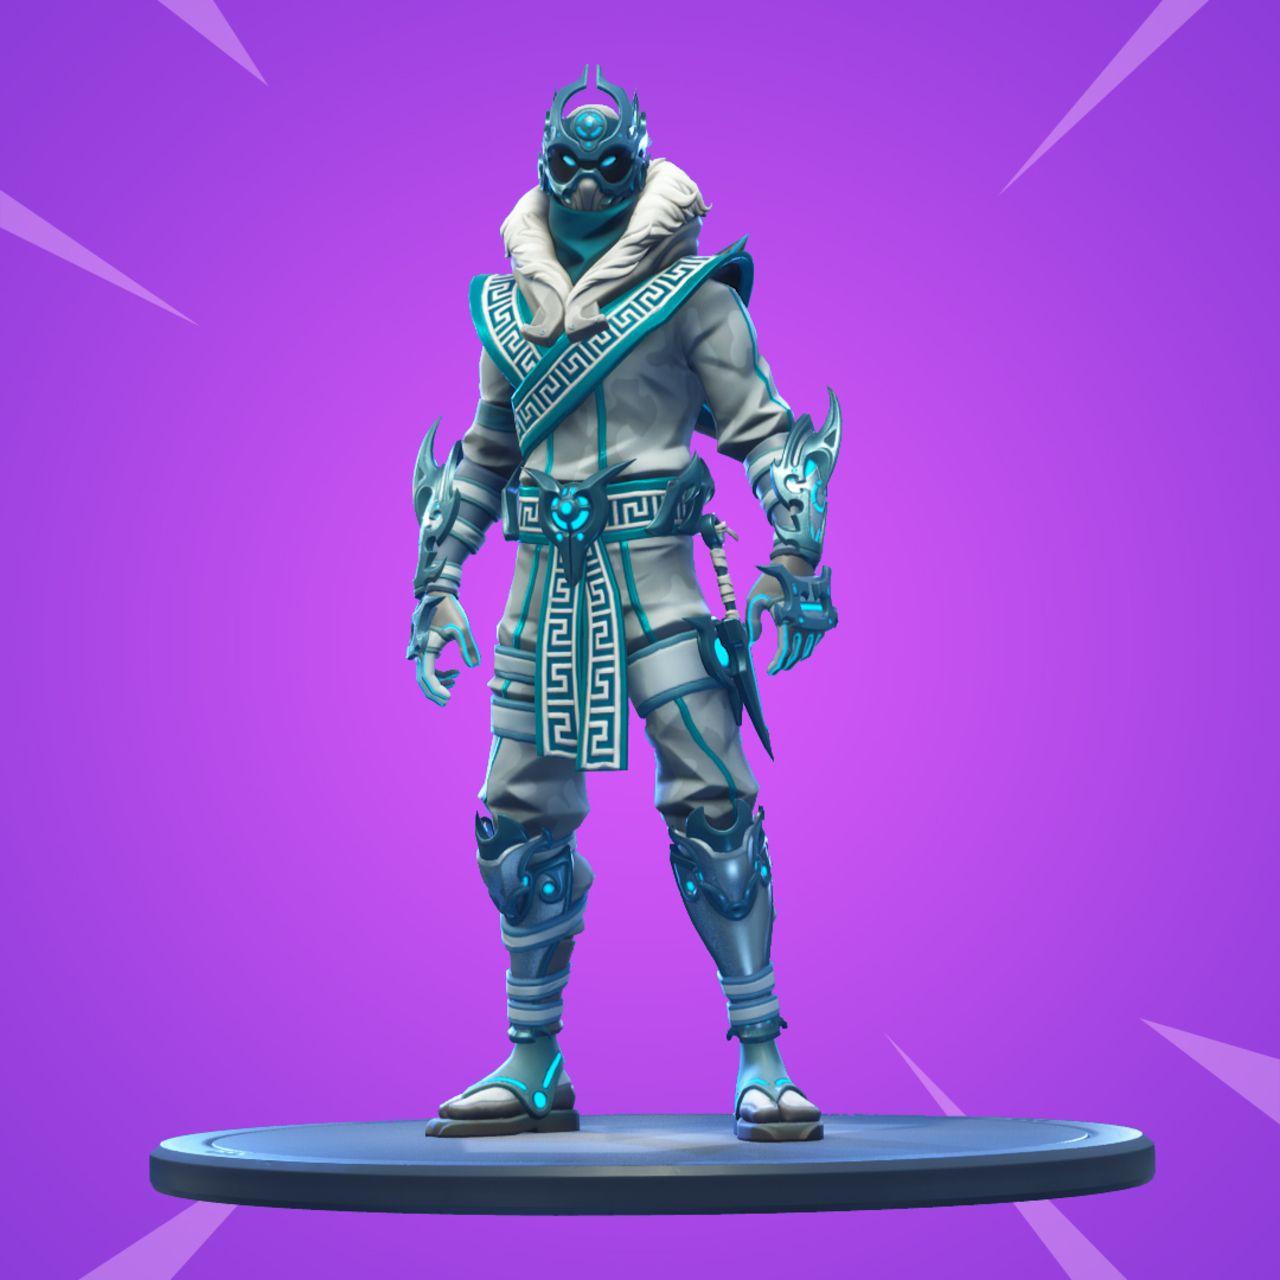 Fortnite Snowfoot Outfit: How to Get This Outfit, What It Looks Like